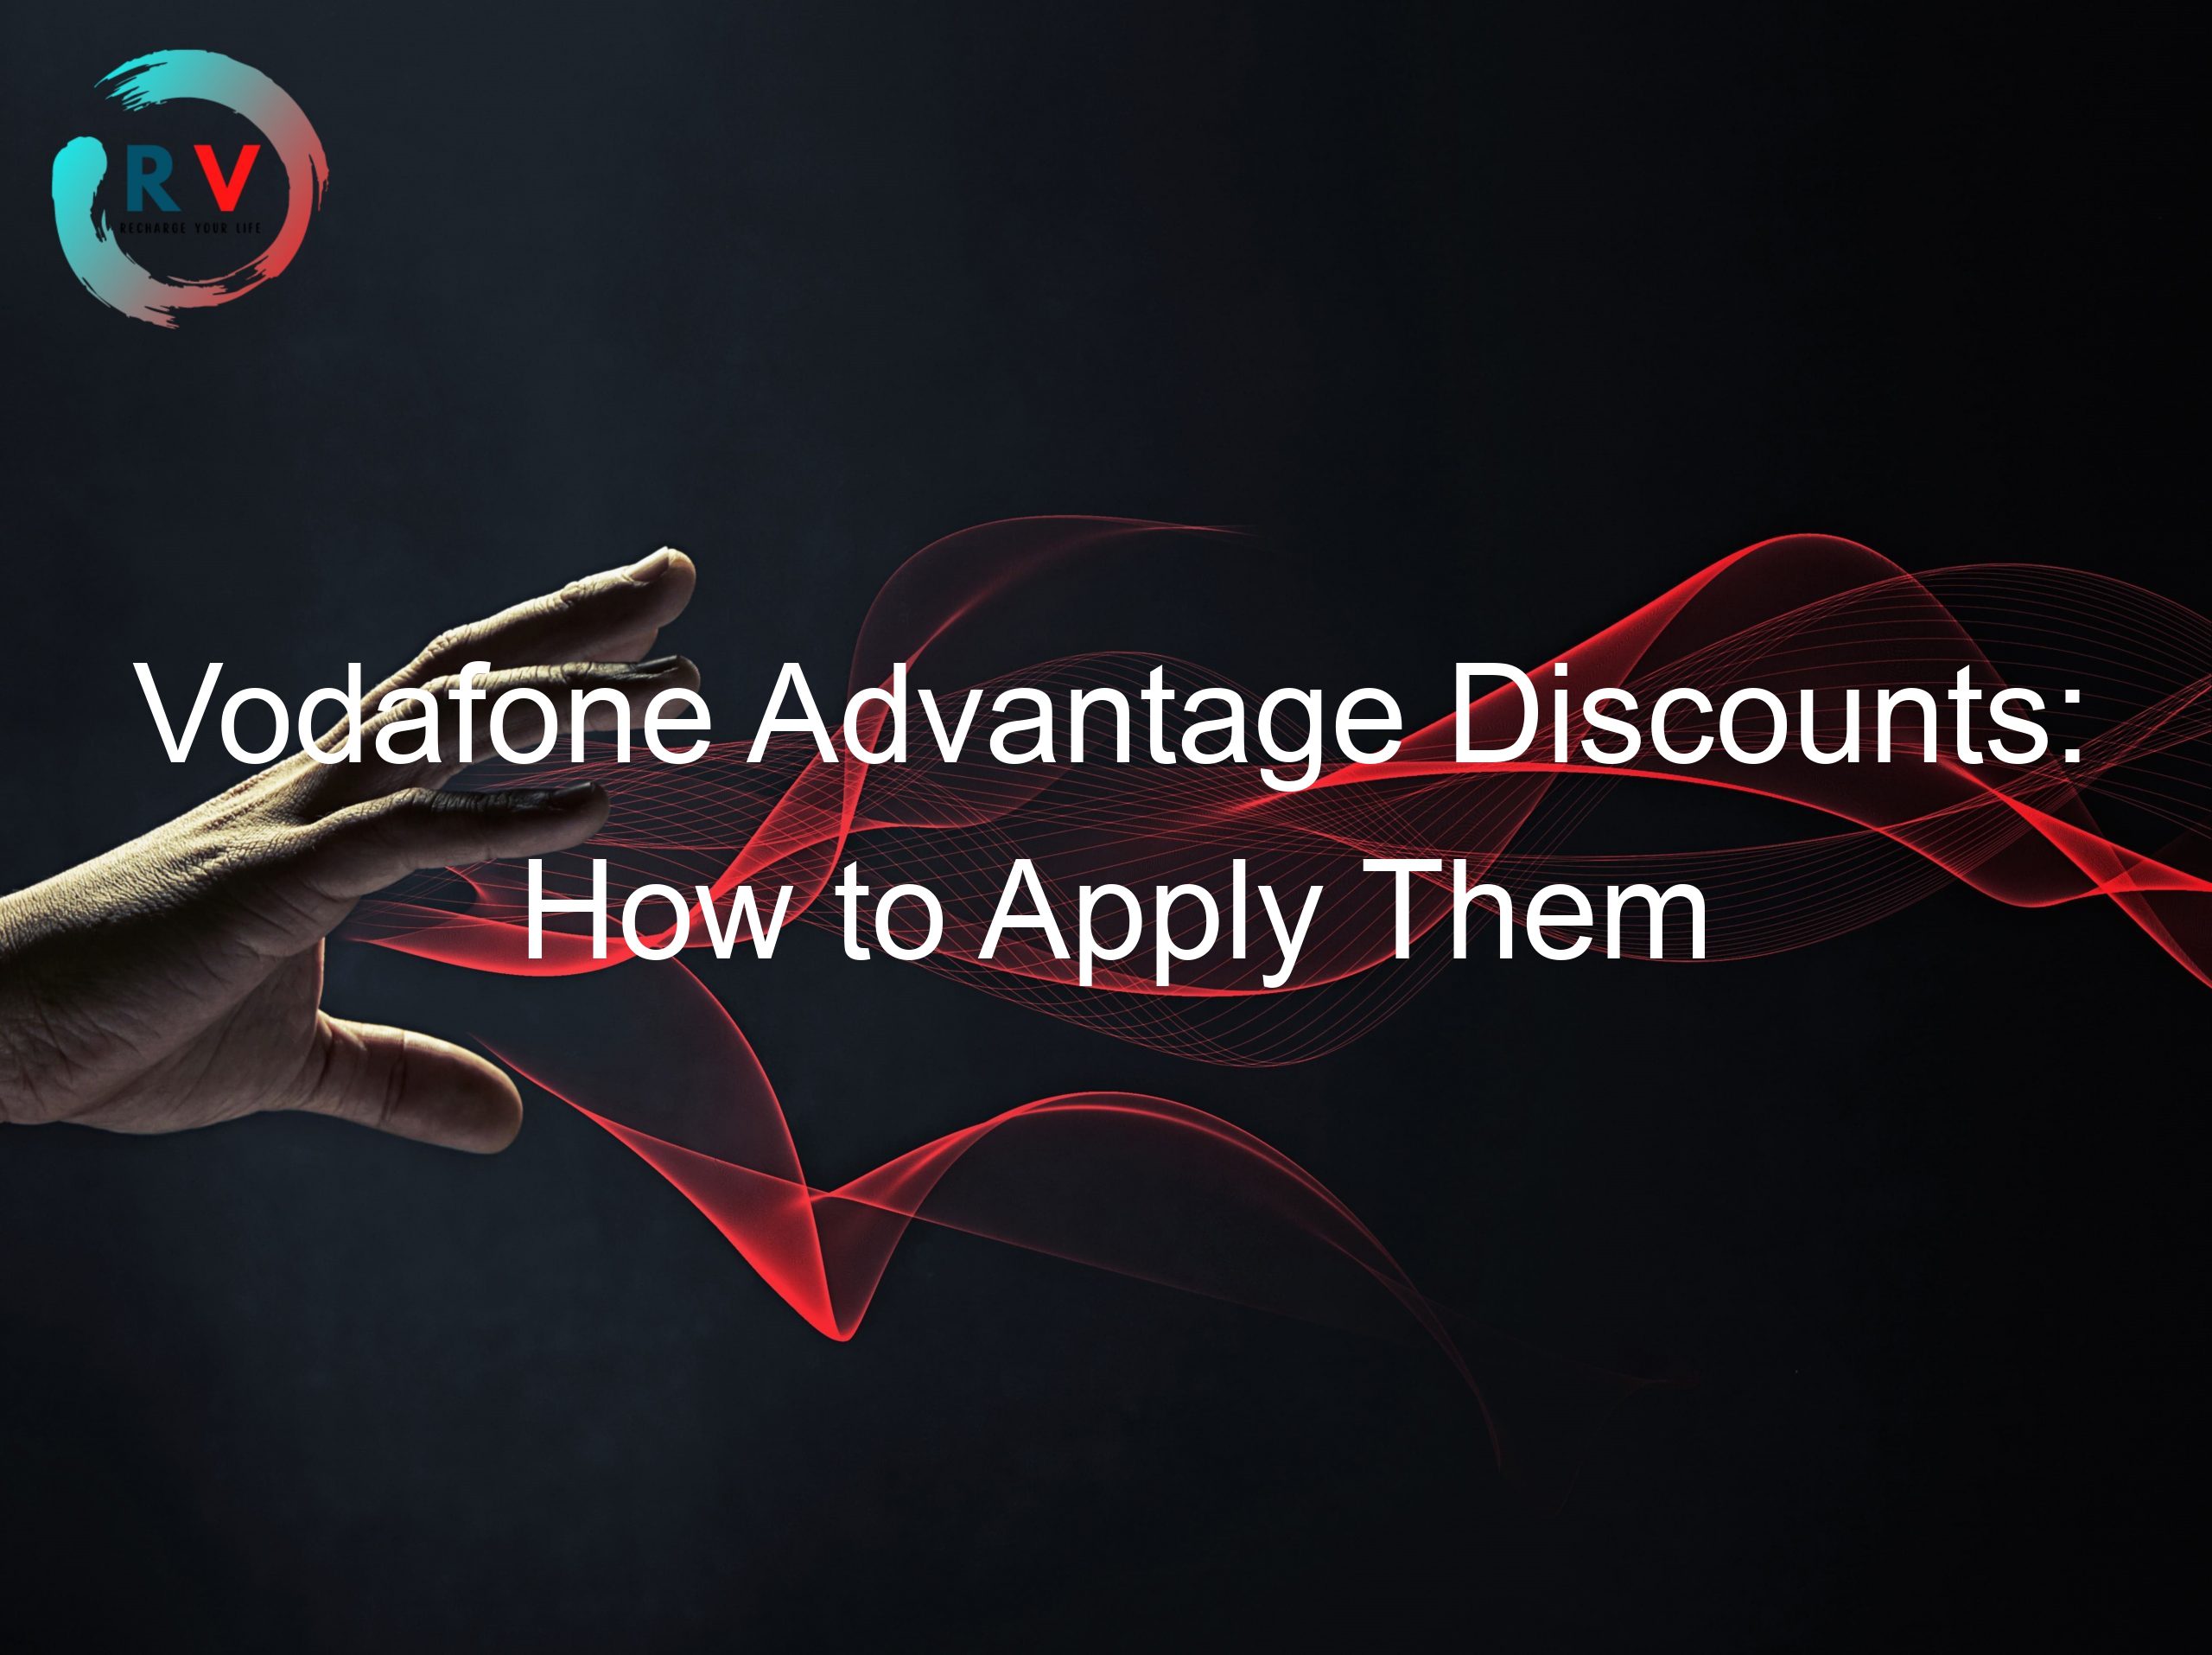 Vodafone Advantage Discounts: How to Apply Them